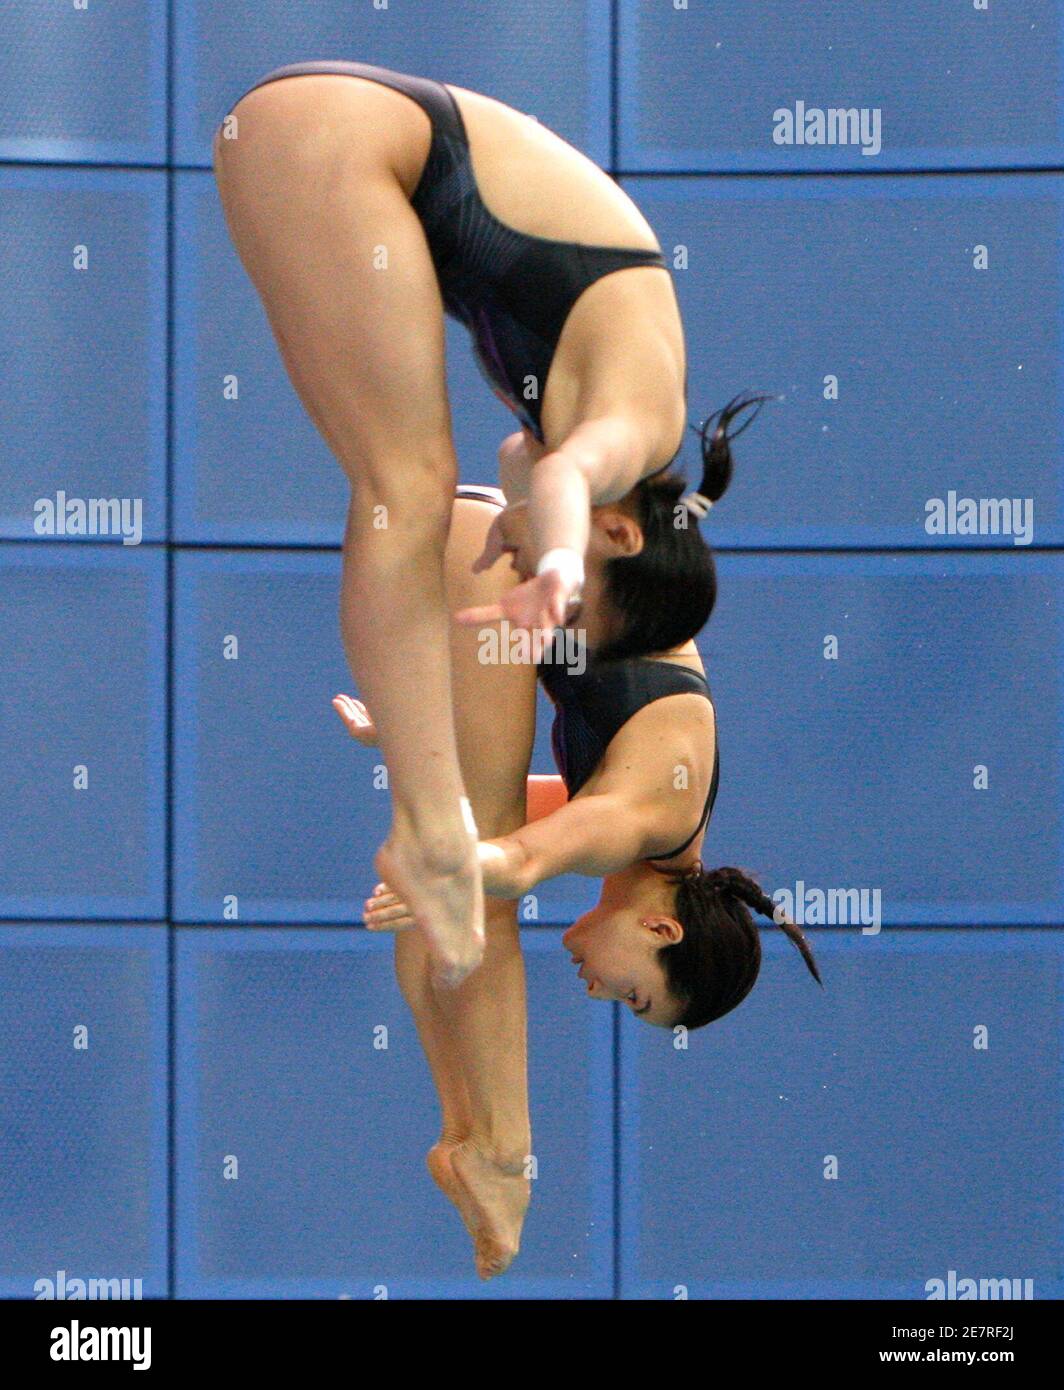 China's Guo Jingjing (bottom) and Wu Minxia compete during the women's synchronized 3m springboard final at the East Asian Games in Hong Kong December 13, 2009.  REUTERS/Tyrone Siu (CHINA - Tags: SPORT DIVING IMAGES OF THE DAY) Stock Photo